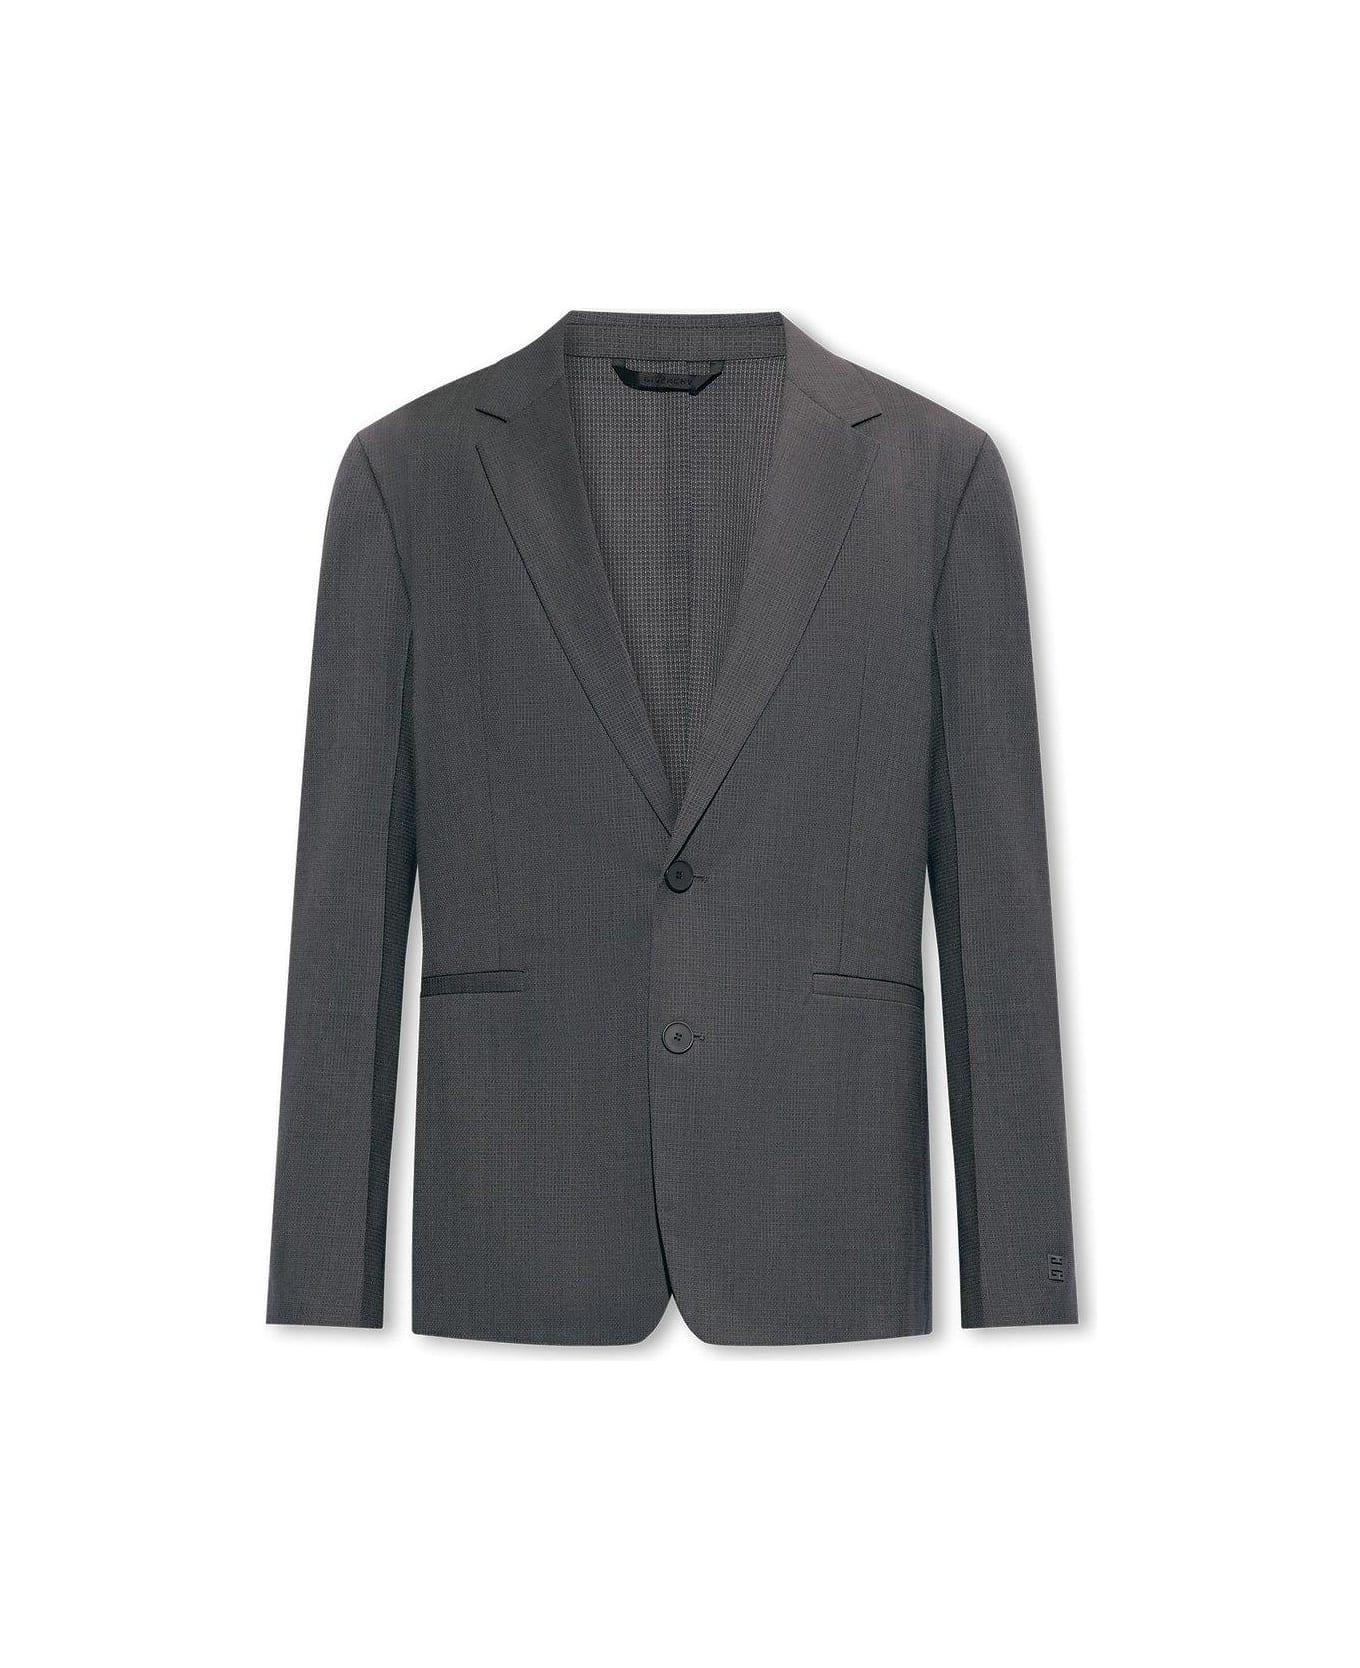 Givenchy Single-breasted Tailored Blazer - Grey